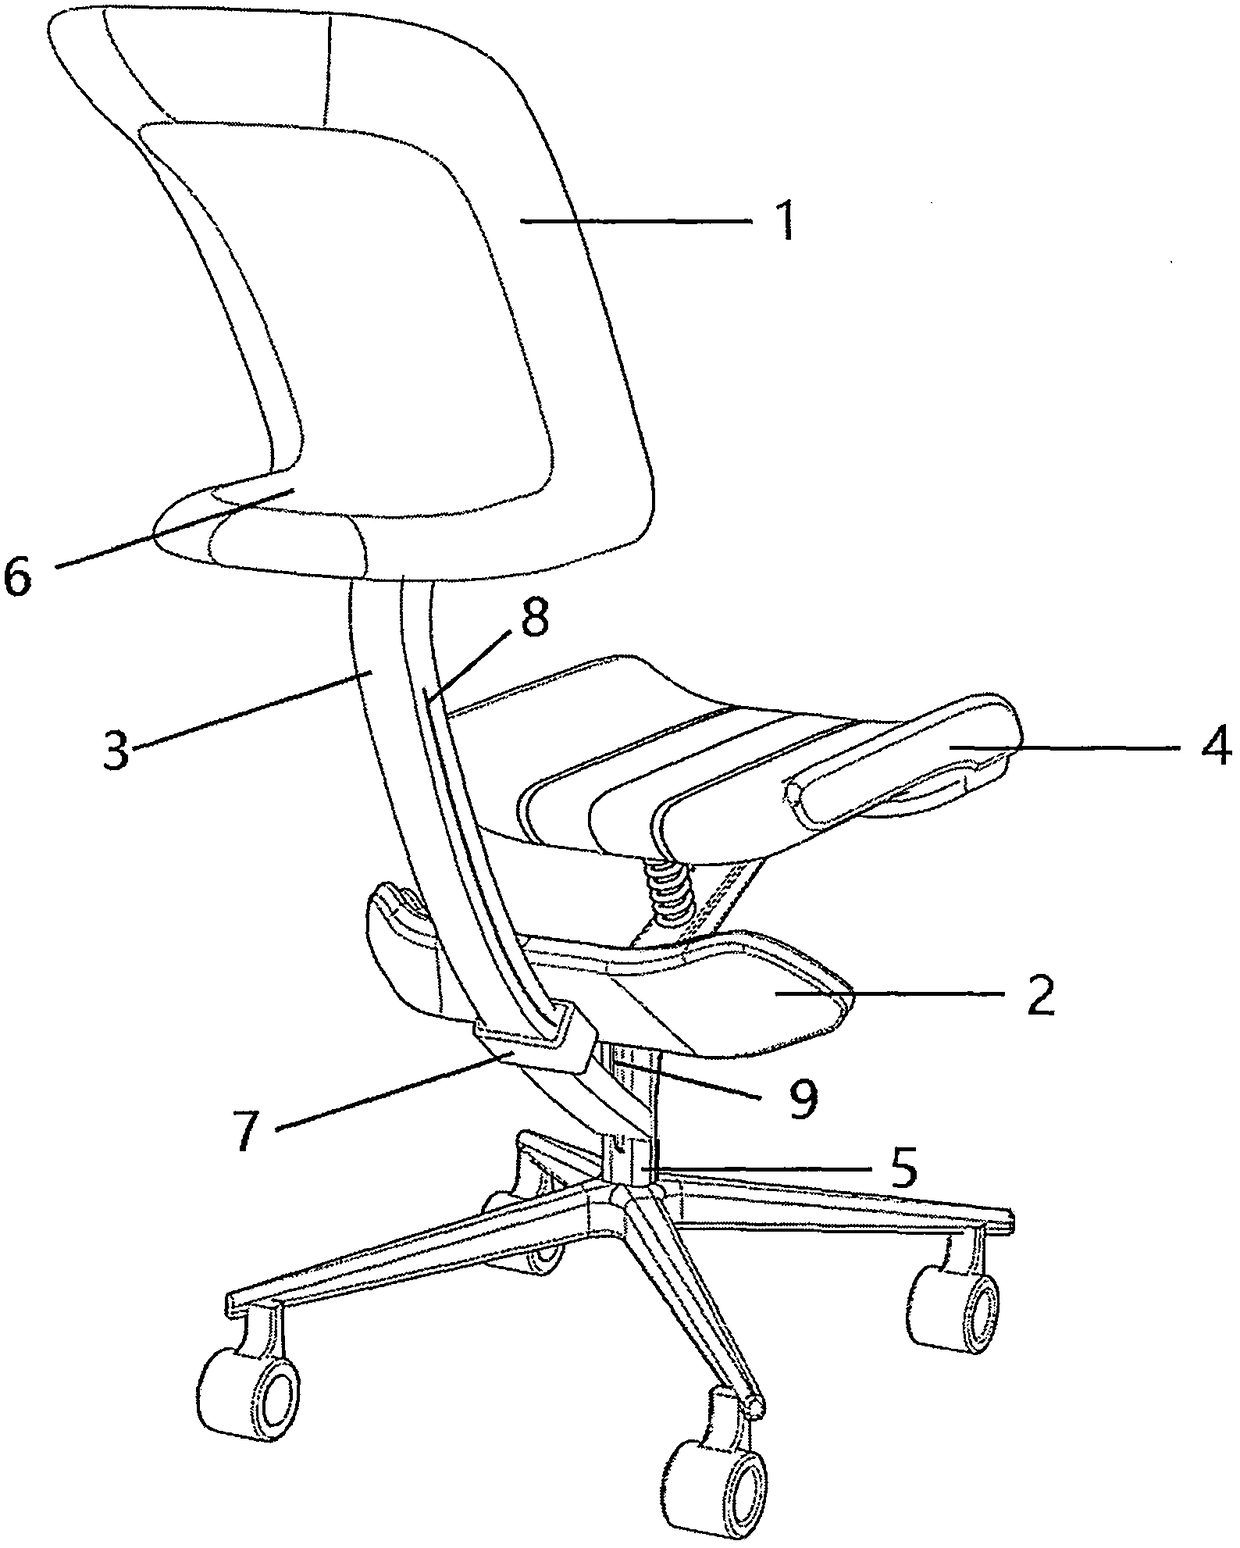 Multifunctional office chair